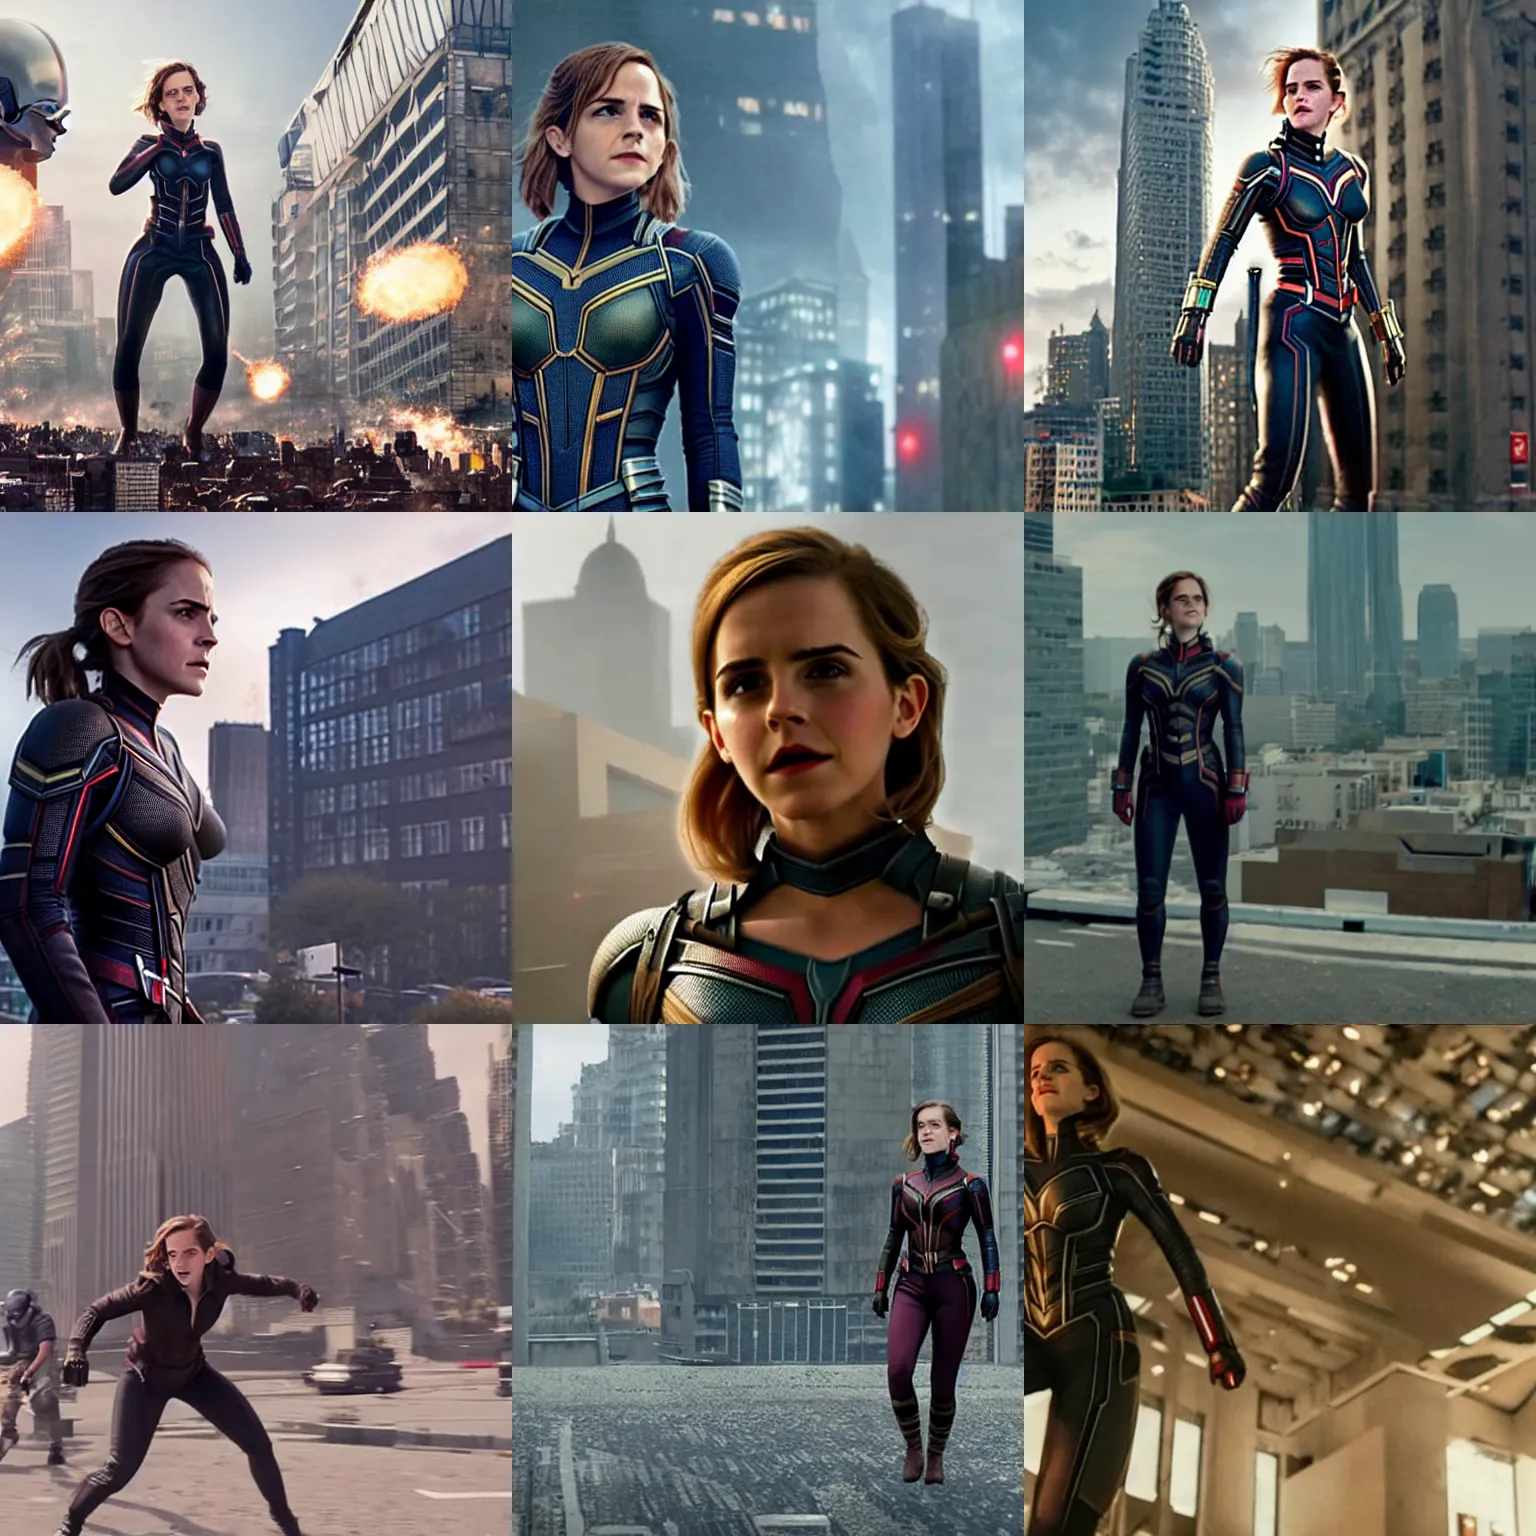 Prompt: Giant Emma Watson grows to an enormous size and attacks a city, film still from 'Ant-Man and the Wasp'